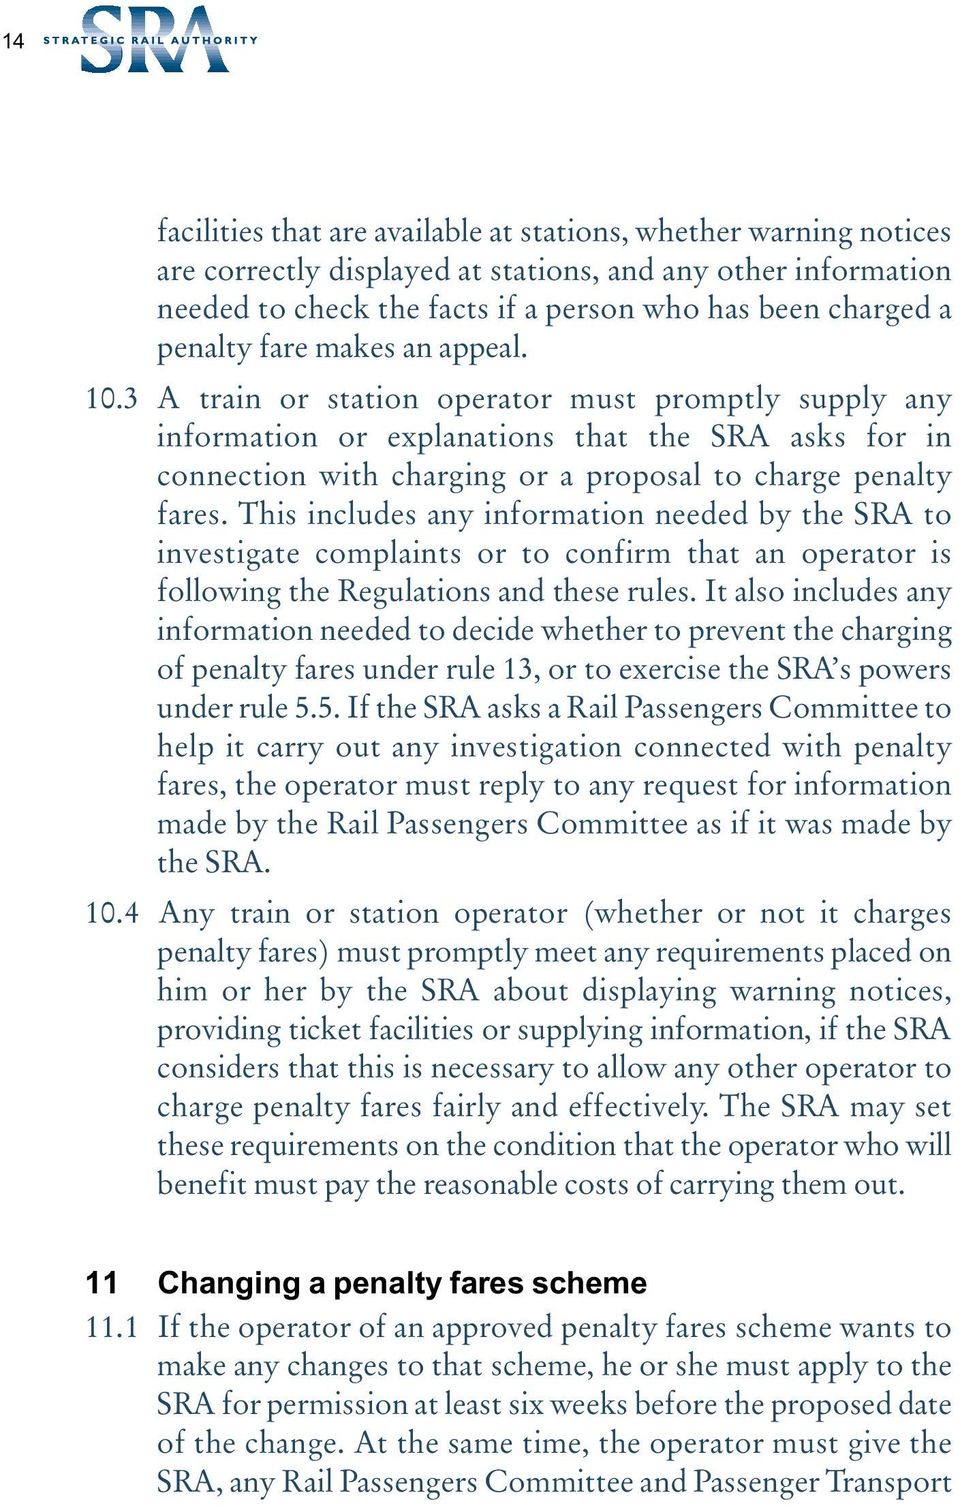 3 A train or station operator must promptly supply any information or explanations that the SRA asks for in connection with charging or a proposal to charge penalty fares.